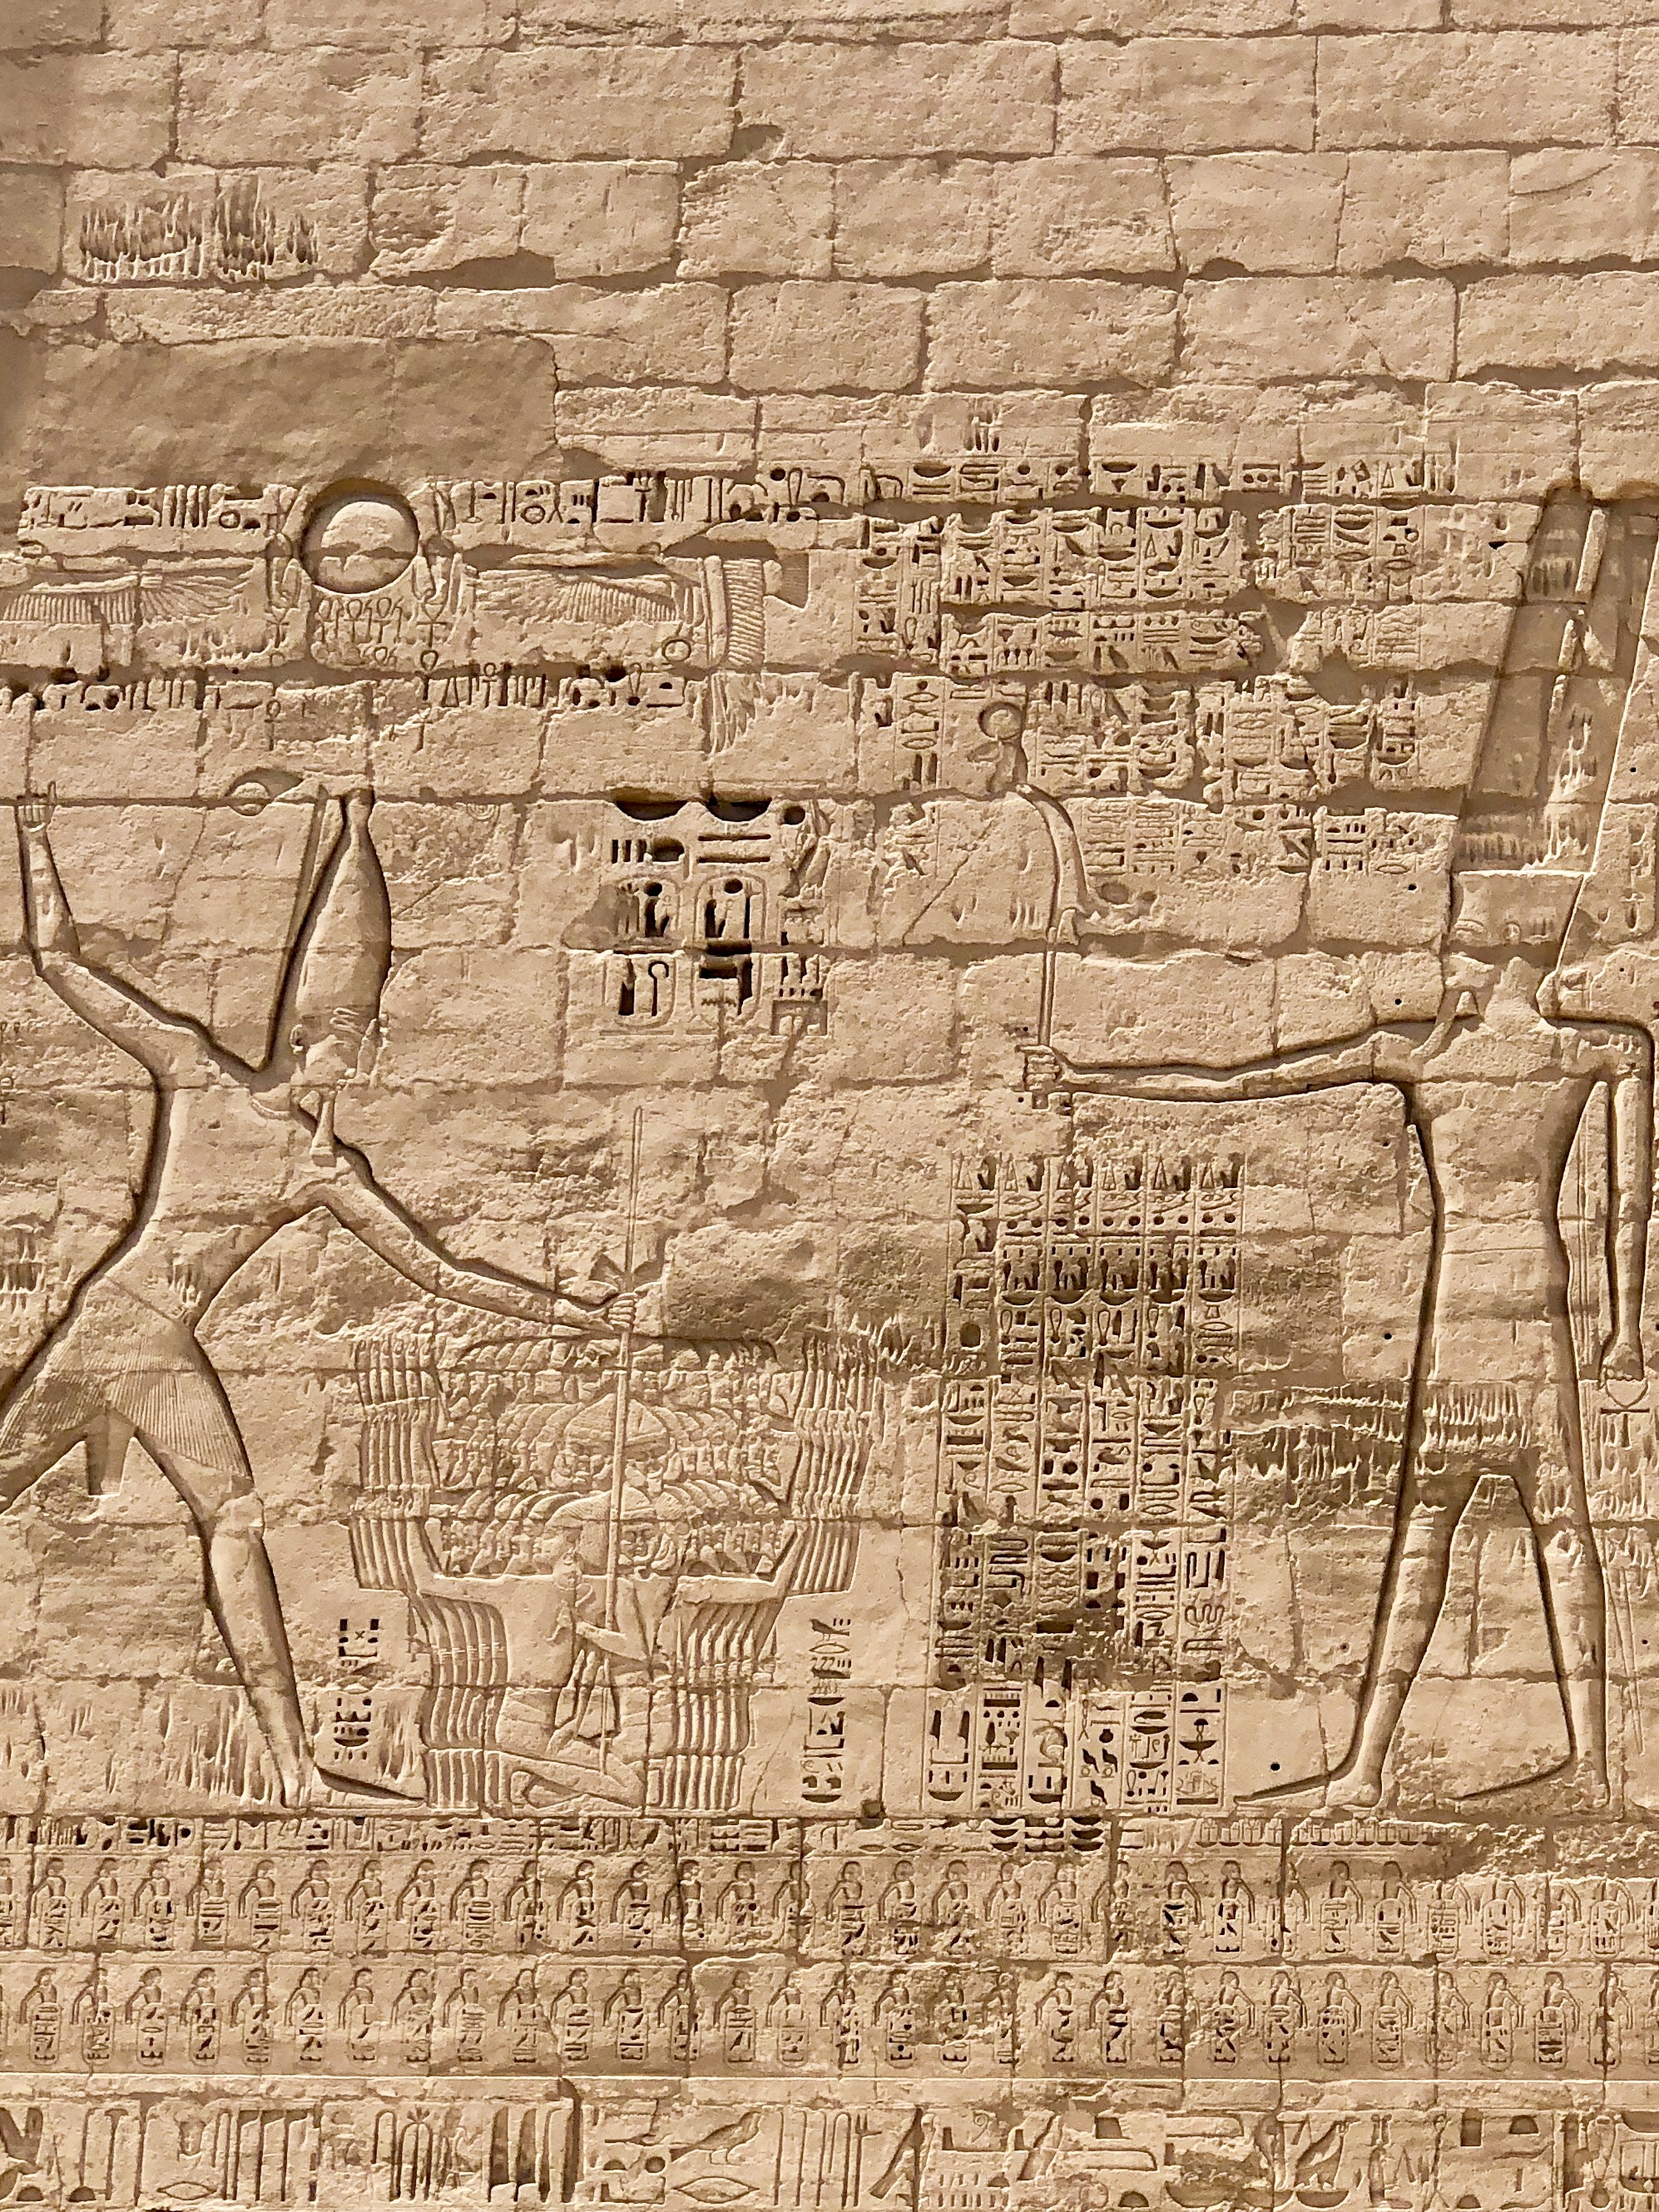 If you defeat warriors who were undefeated, you brag about it, like Ramesses III did